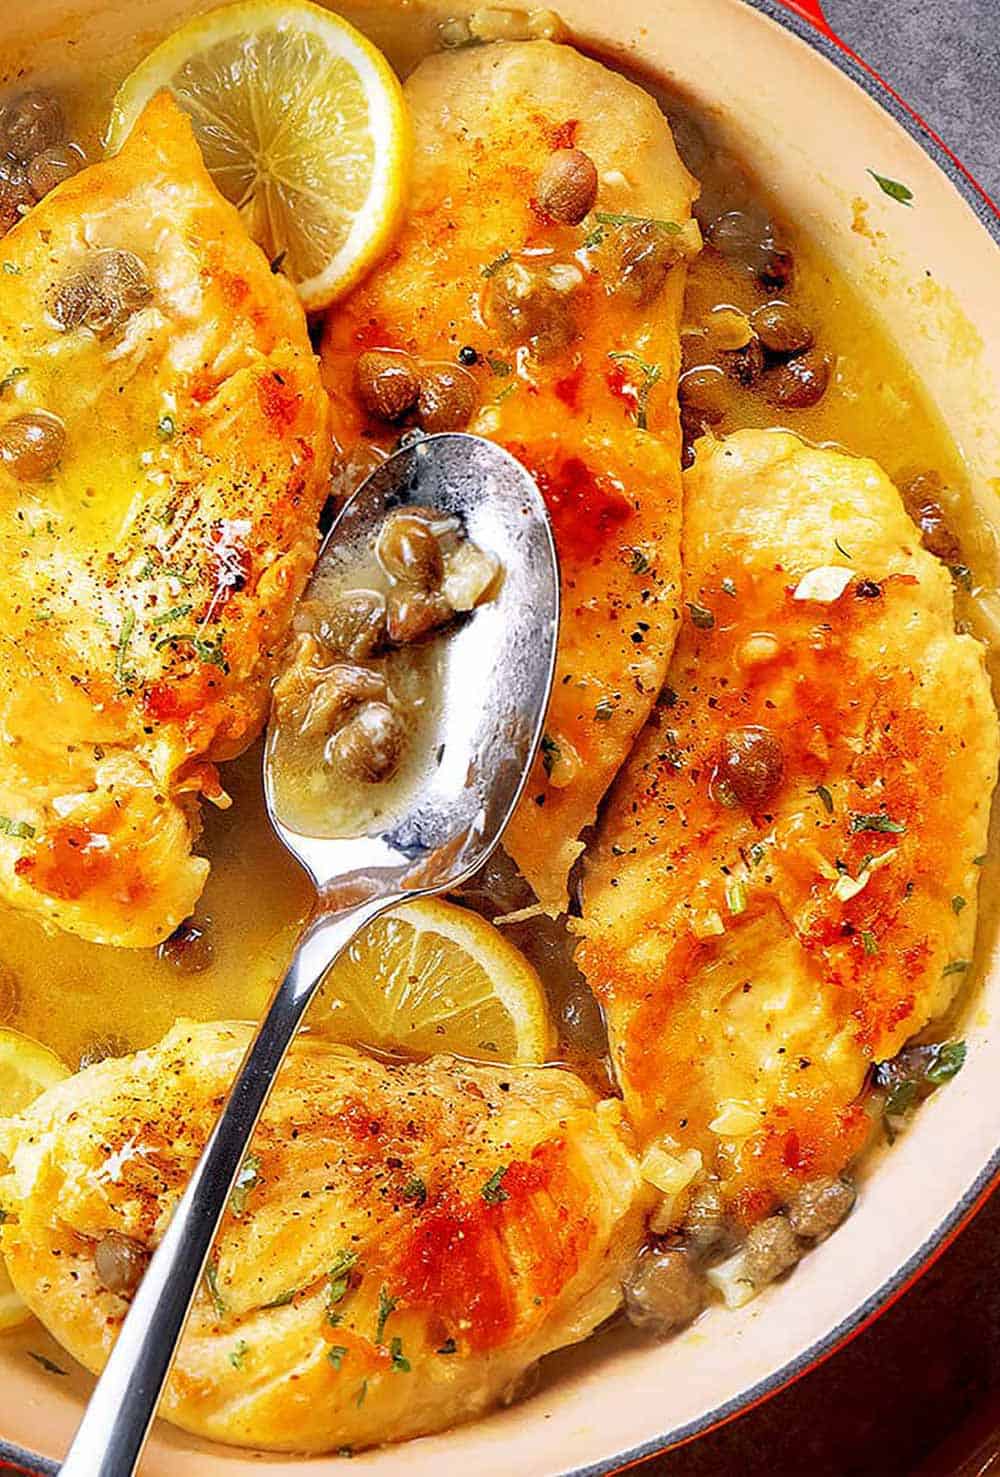 Image of chicken piccata being cooked in a skillet. The chicken is golden brown and has a crispy coating. The skillet contains a lemon sauce with capers and parsley, and there are slices of lemon and parsley leaves scattered around the chicken.